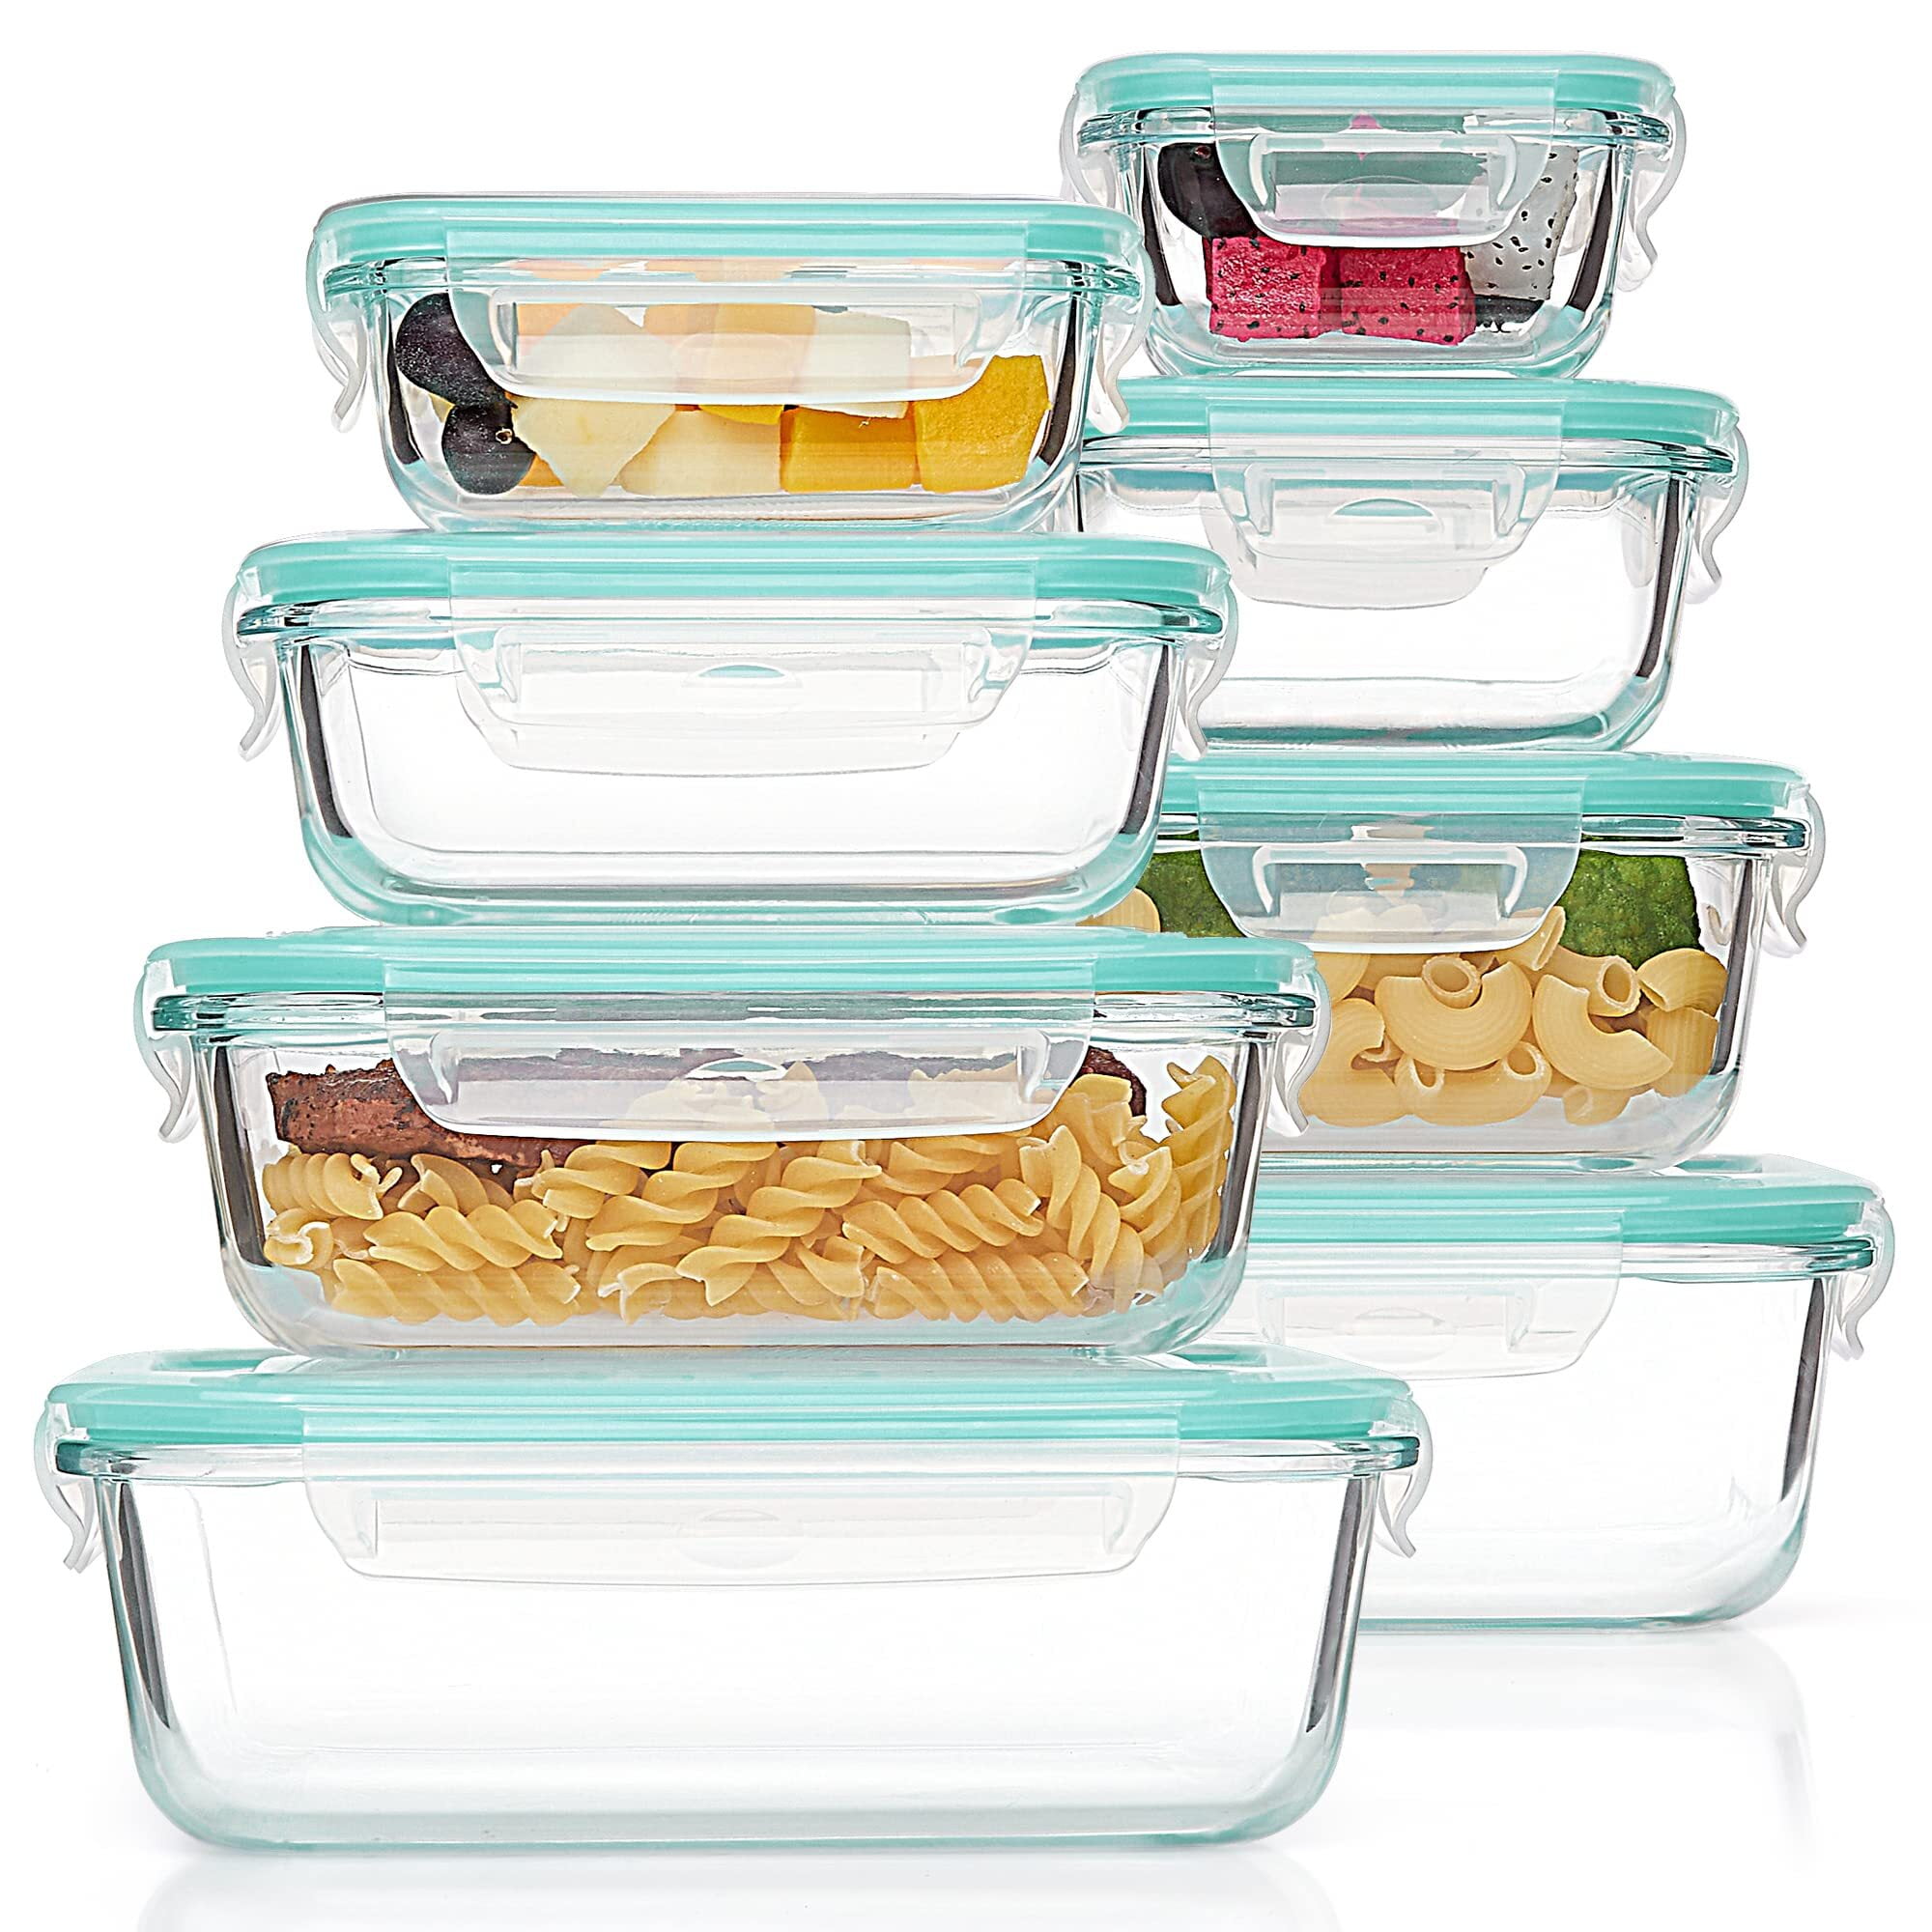  Pyrex Simply Store 14-Pc Glass Food Storage Container Set with  Lid, 7-Cup, 4-Cup, 2-Cup & 1-Cup Round Meal Prep Containers with Lid,  BPA-Free, Dishwasher, Microwave and Freezer Safe: Home & Kitchen